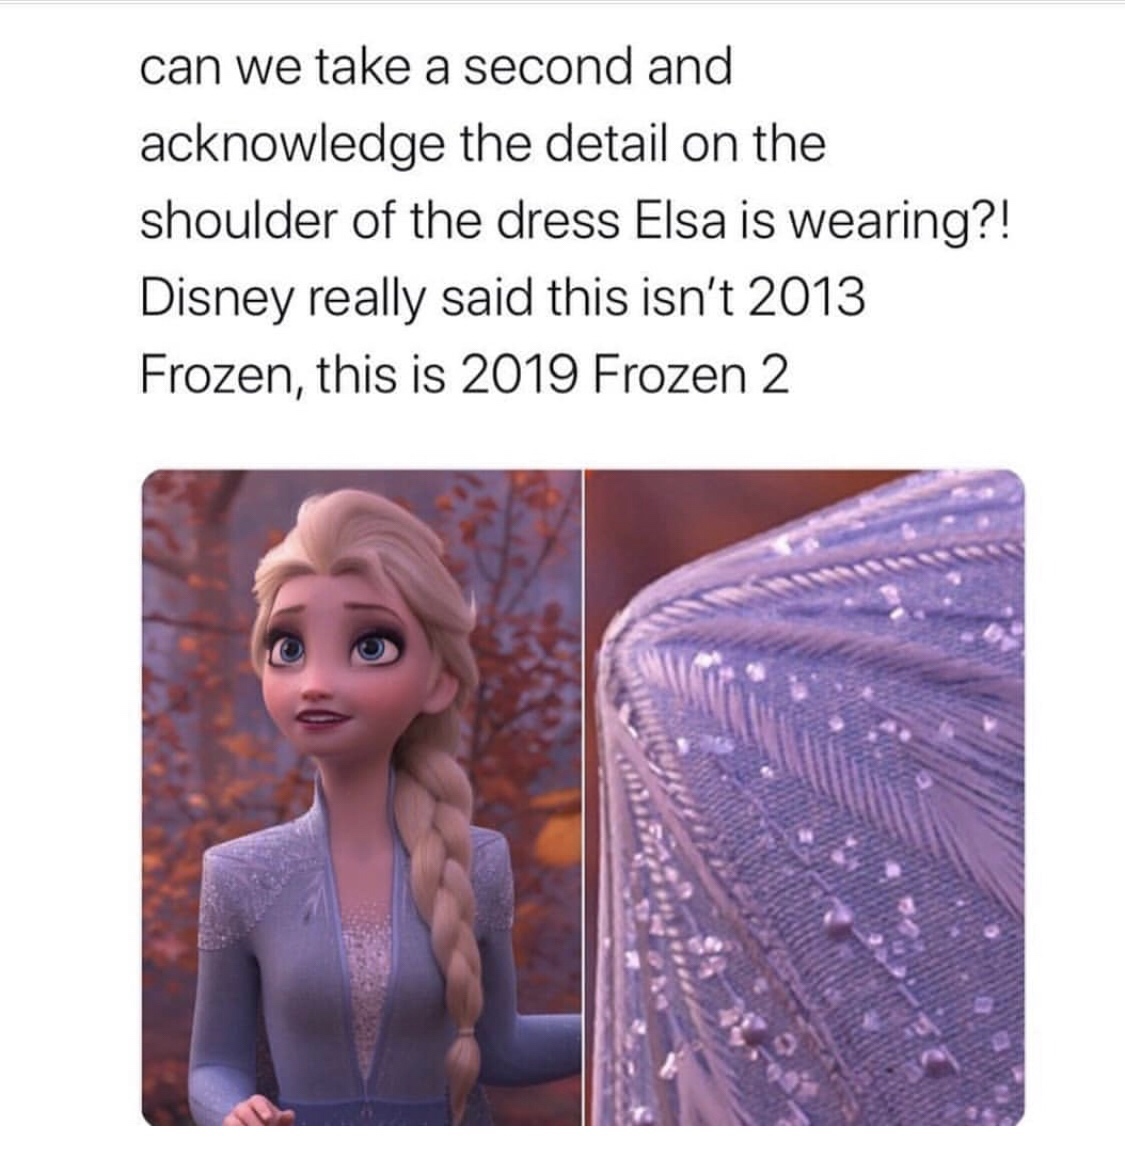 frozen 2 - can we take a second and acknowledge the detail on the shoulder of the dress Elsa is wearing?! Disney really said this isn't 2013 Frozen, this is 2019 Frozen 2